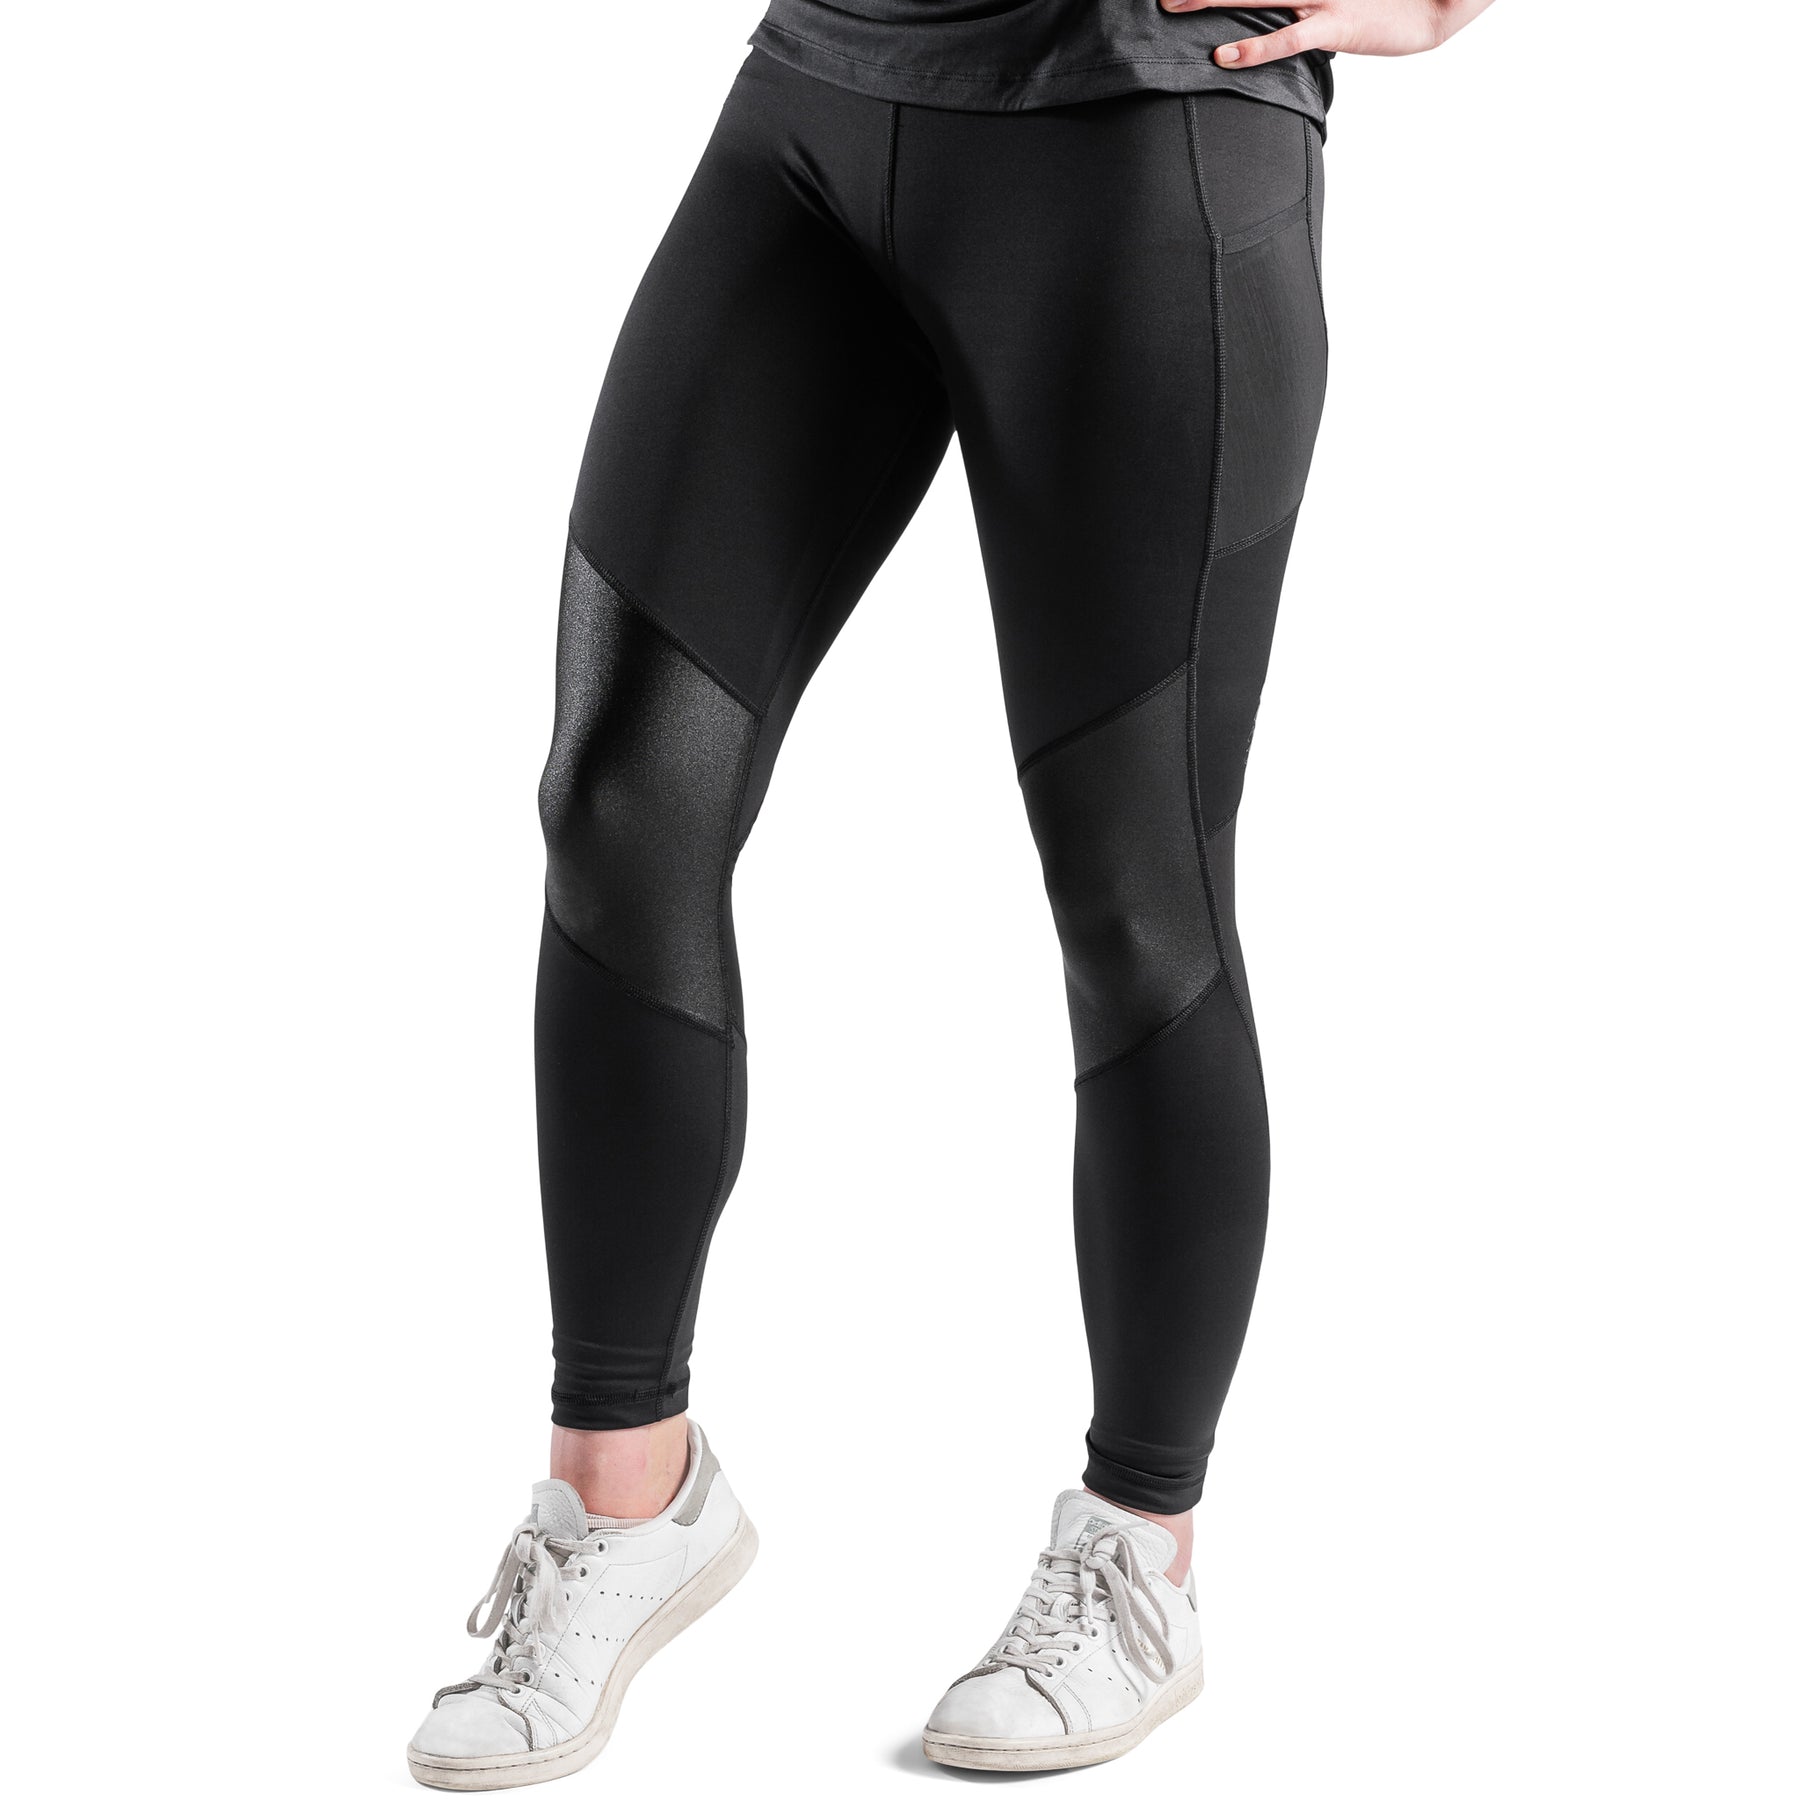 Alphaskin Glam On Tights by adidas (Final Sale)